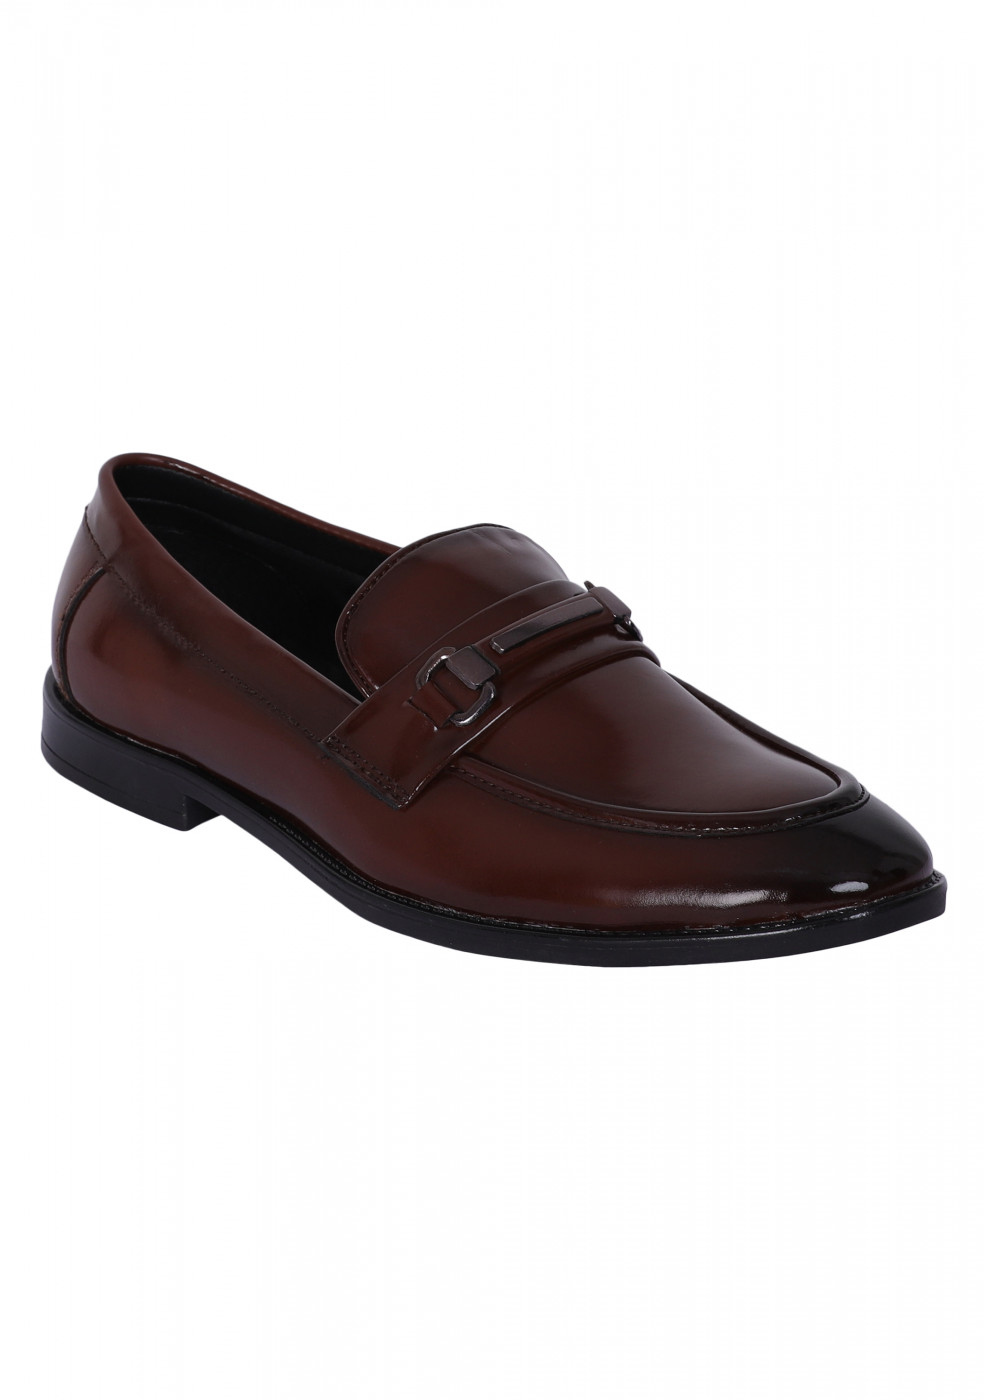 XSTOM Stylish Formal Brown Color Shoes For Men